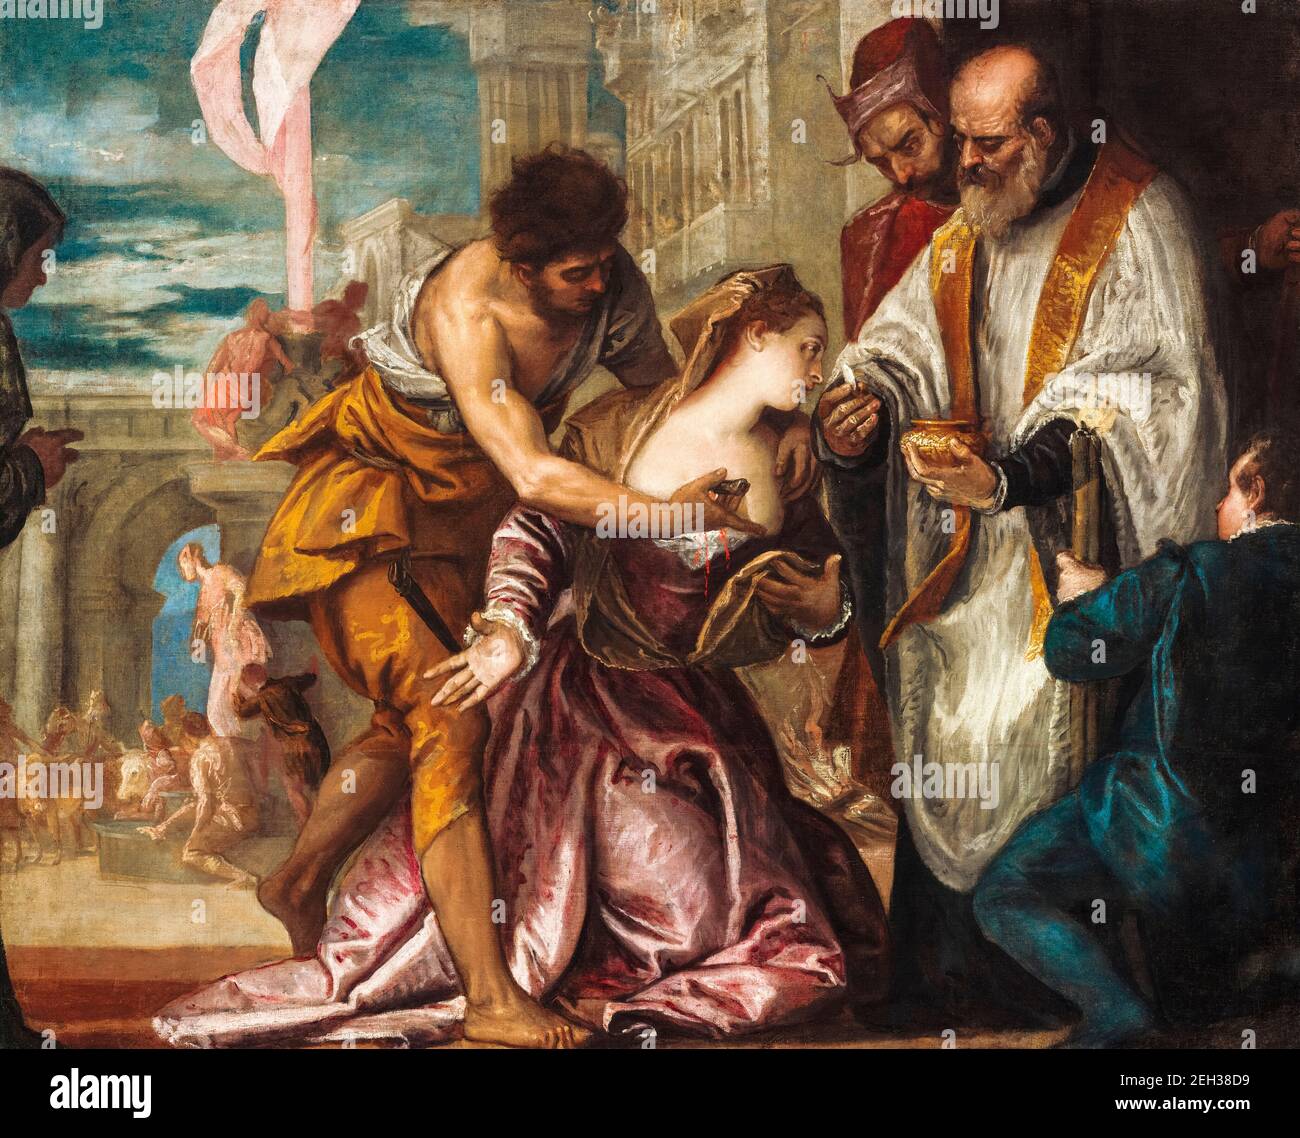 Paolo Veronese, The Martyrdom and Last Communion of Saint Lucy, painting, 1585-1586 Stock Photo